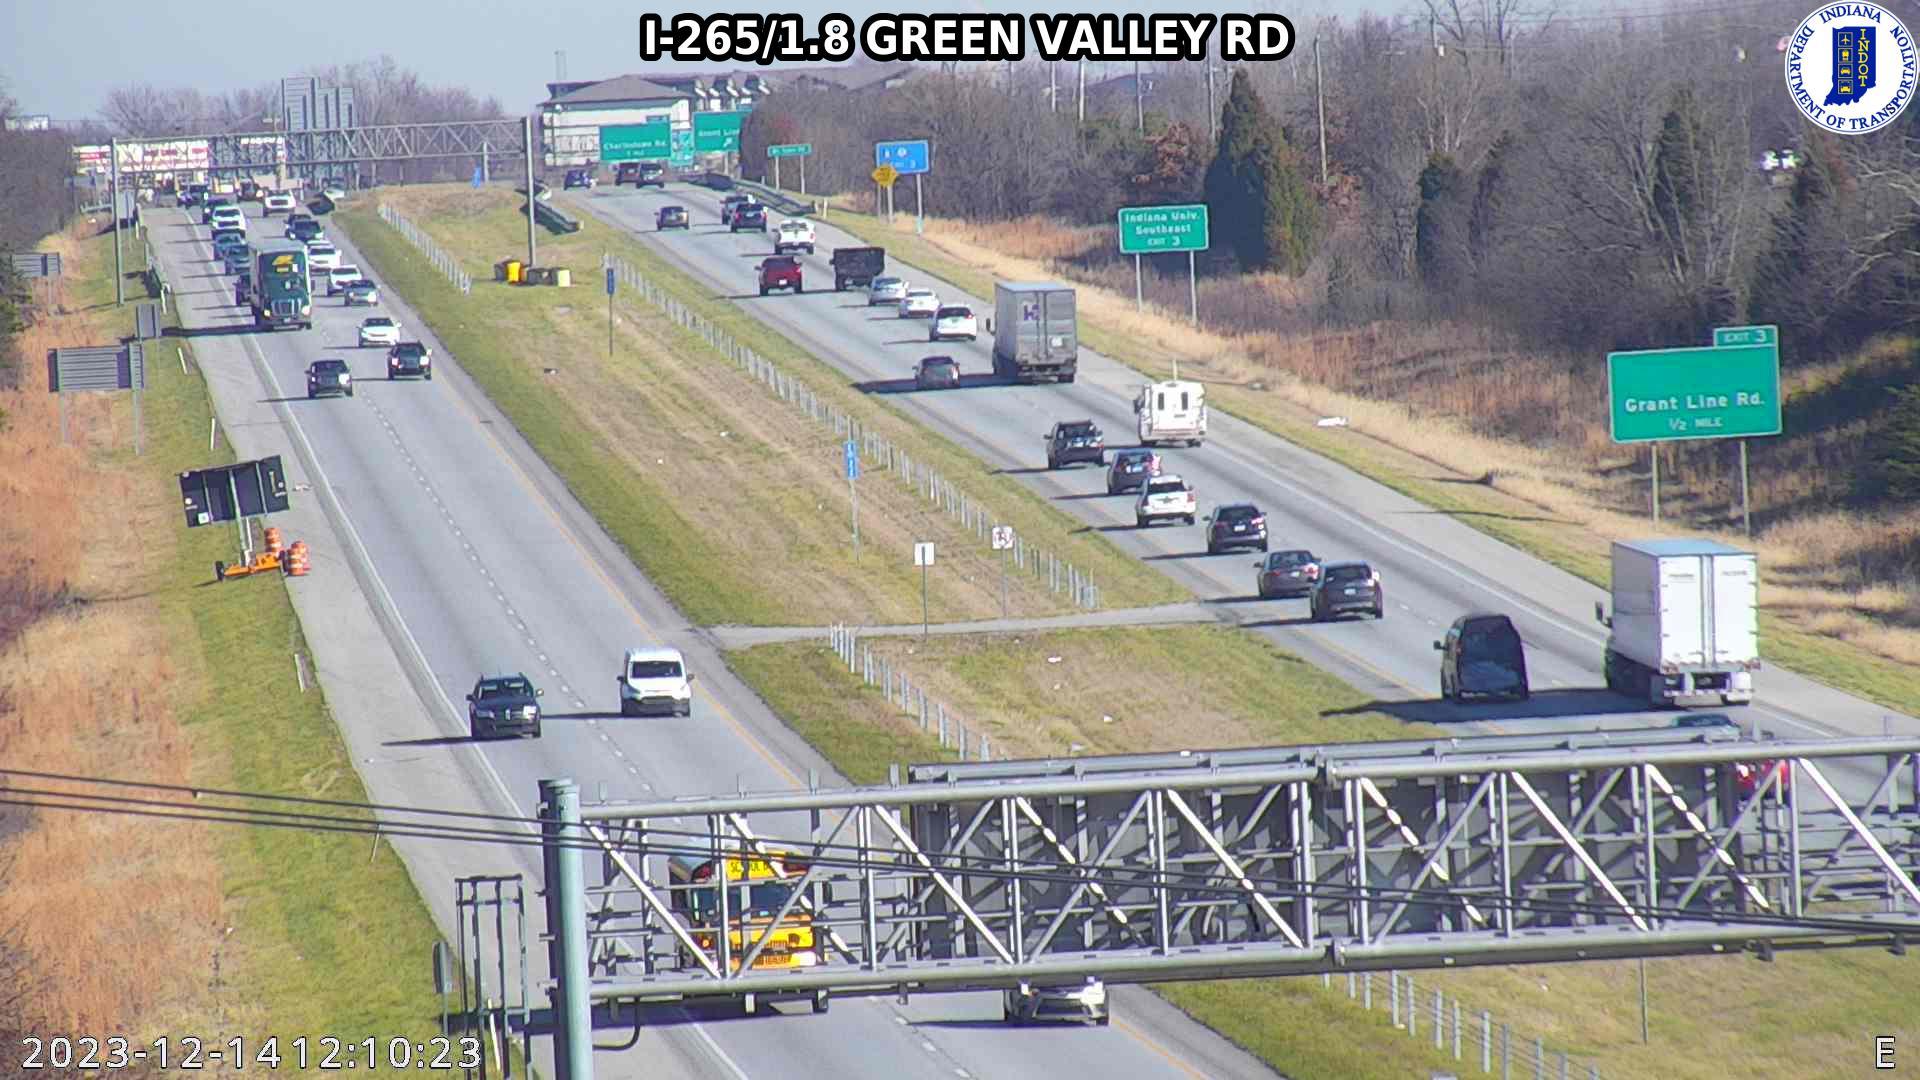 Traffic Cam New Albany: I-265: I-265/1.8 GREEN VALLEY RD Player